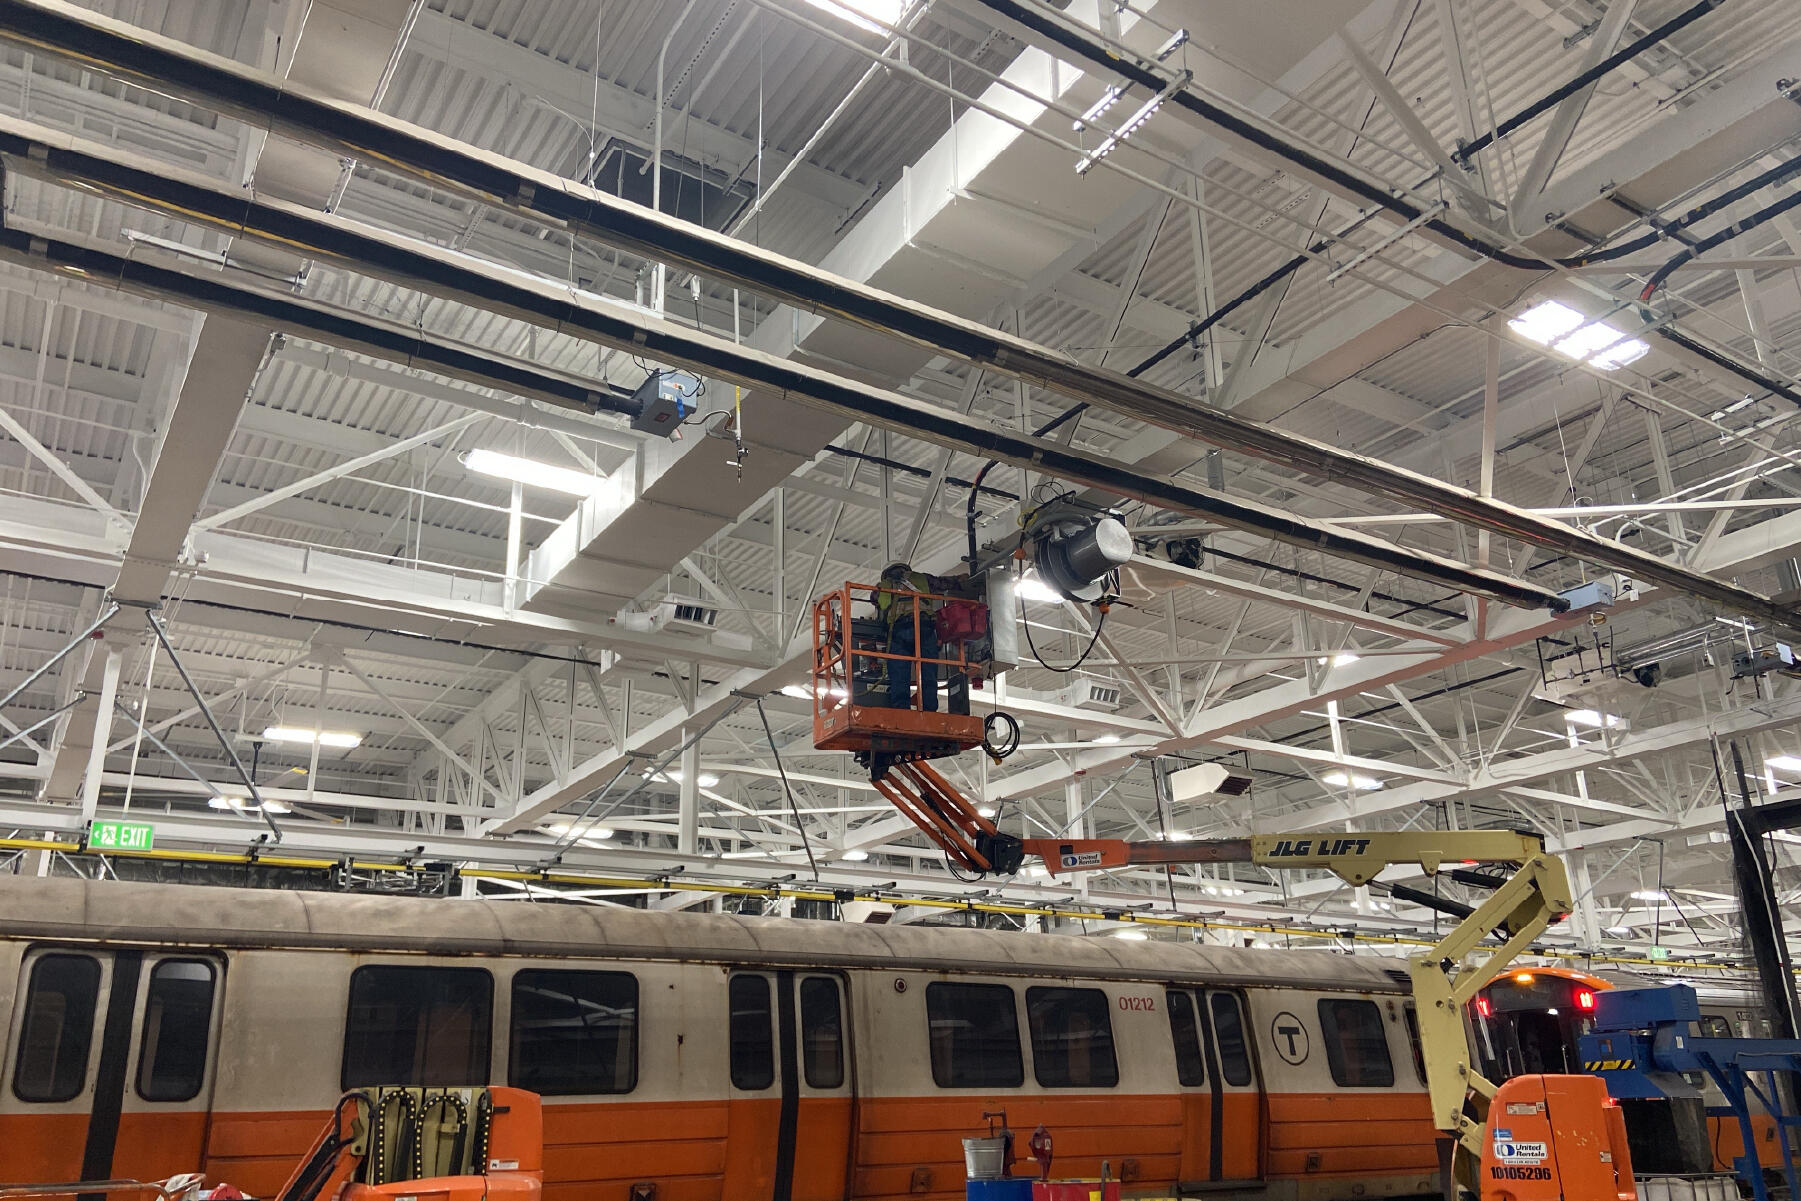 a crew member in a lift working on something near the ceiling above an old orange line car inside the maintenance facility